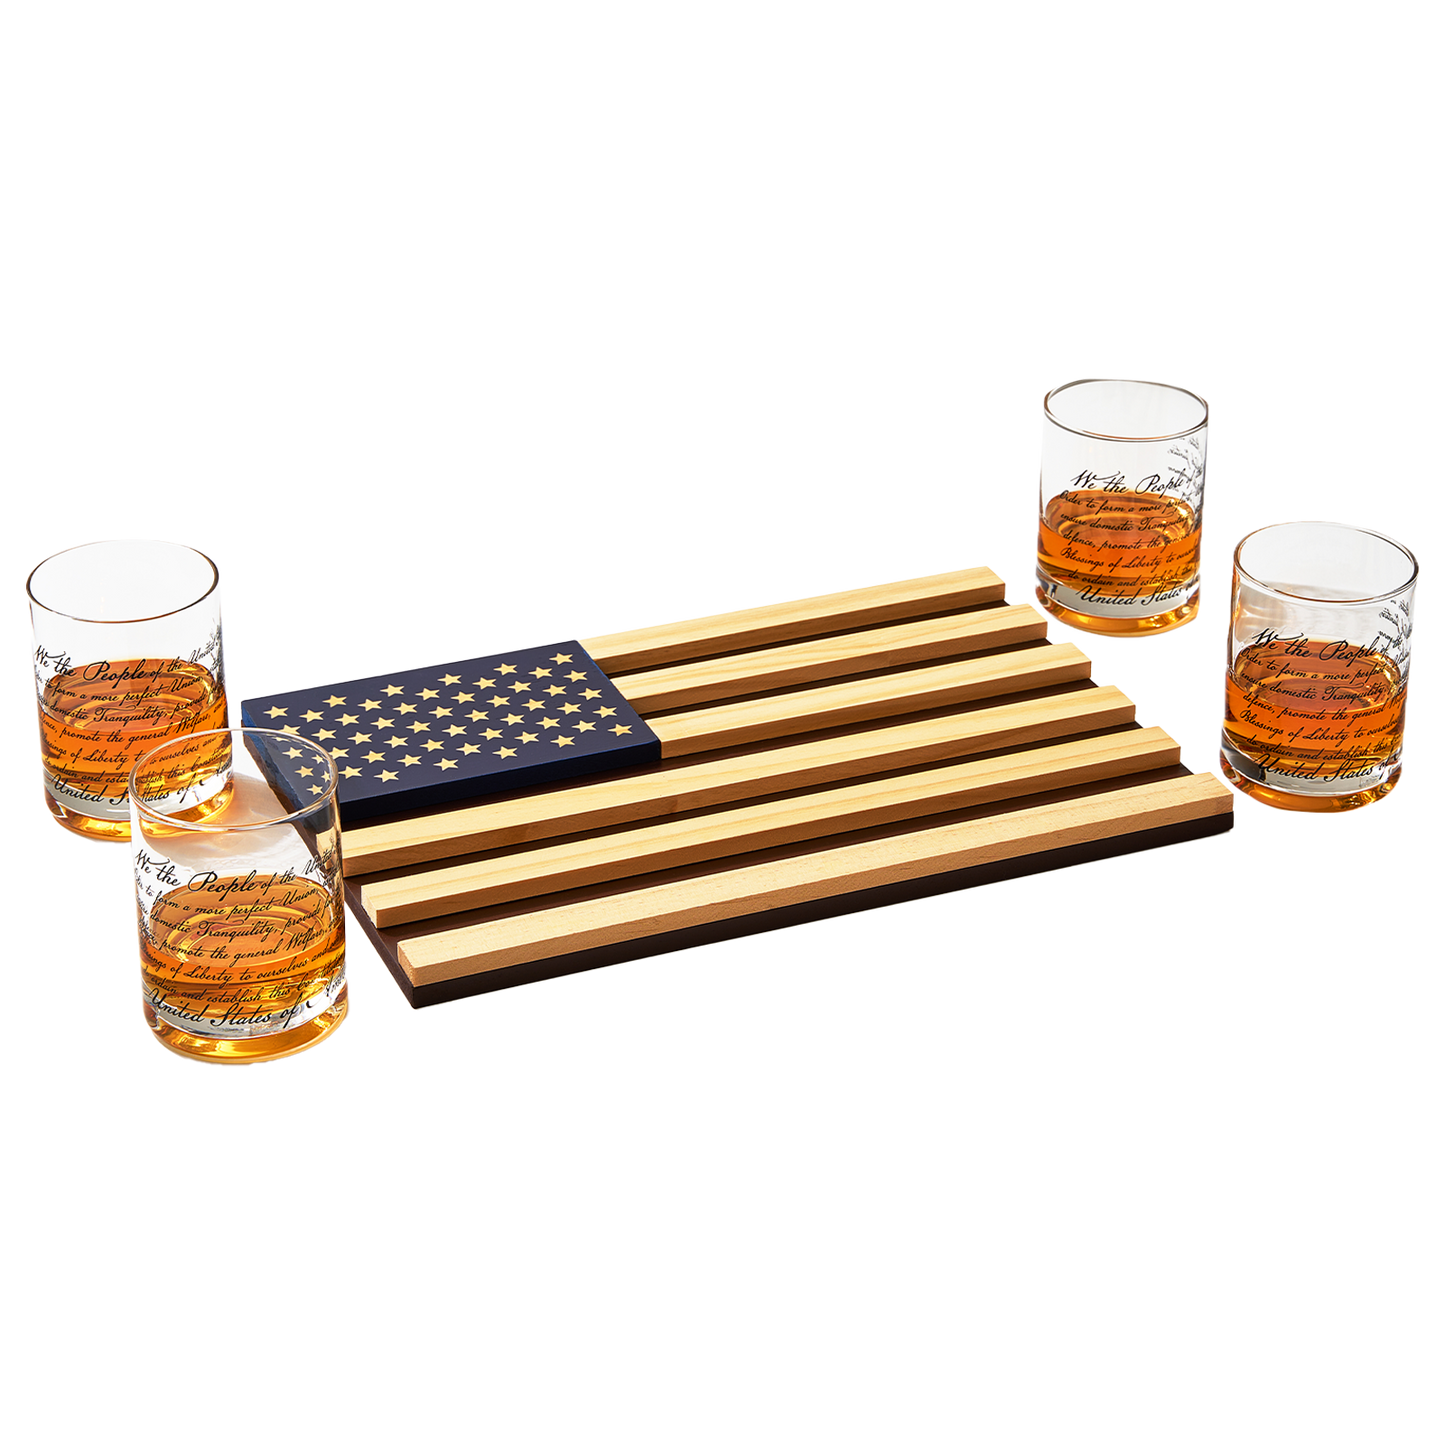 Whiskey Glasses – United States Constitution - Wood American Flag Tray & Set of 4 We The People 10oz America Glassware, Old Fashioned Rocks Glass, Freedom Of Speech Law Gift Set US Patriotic-0